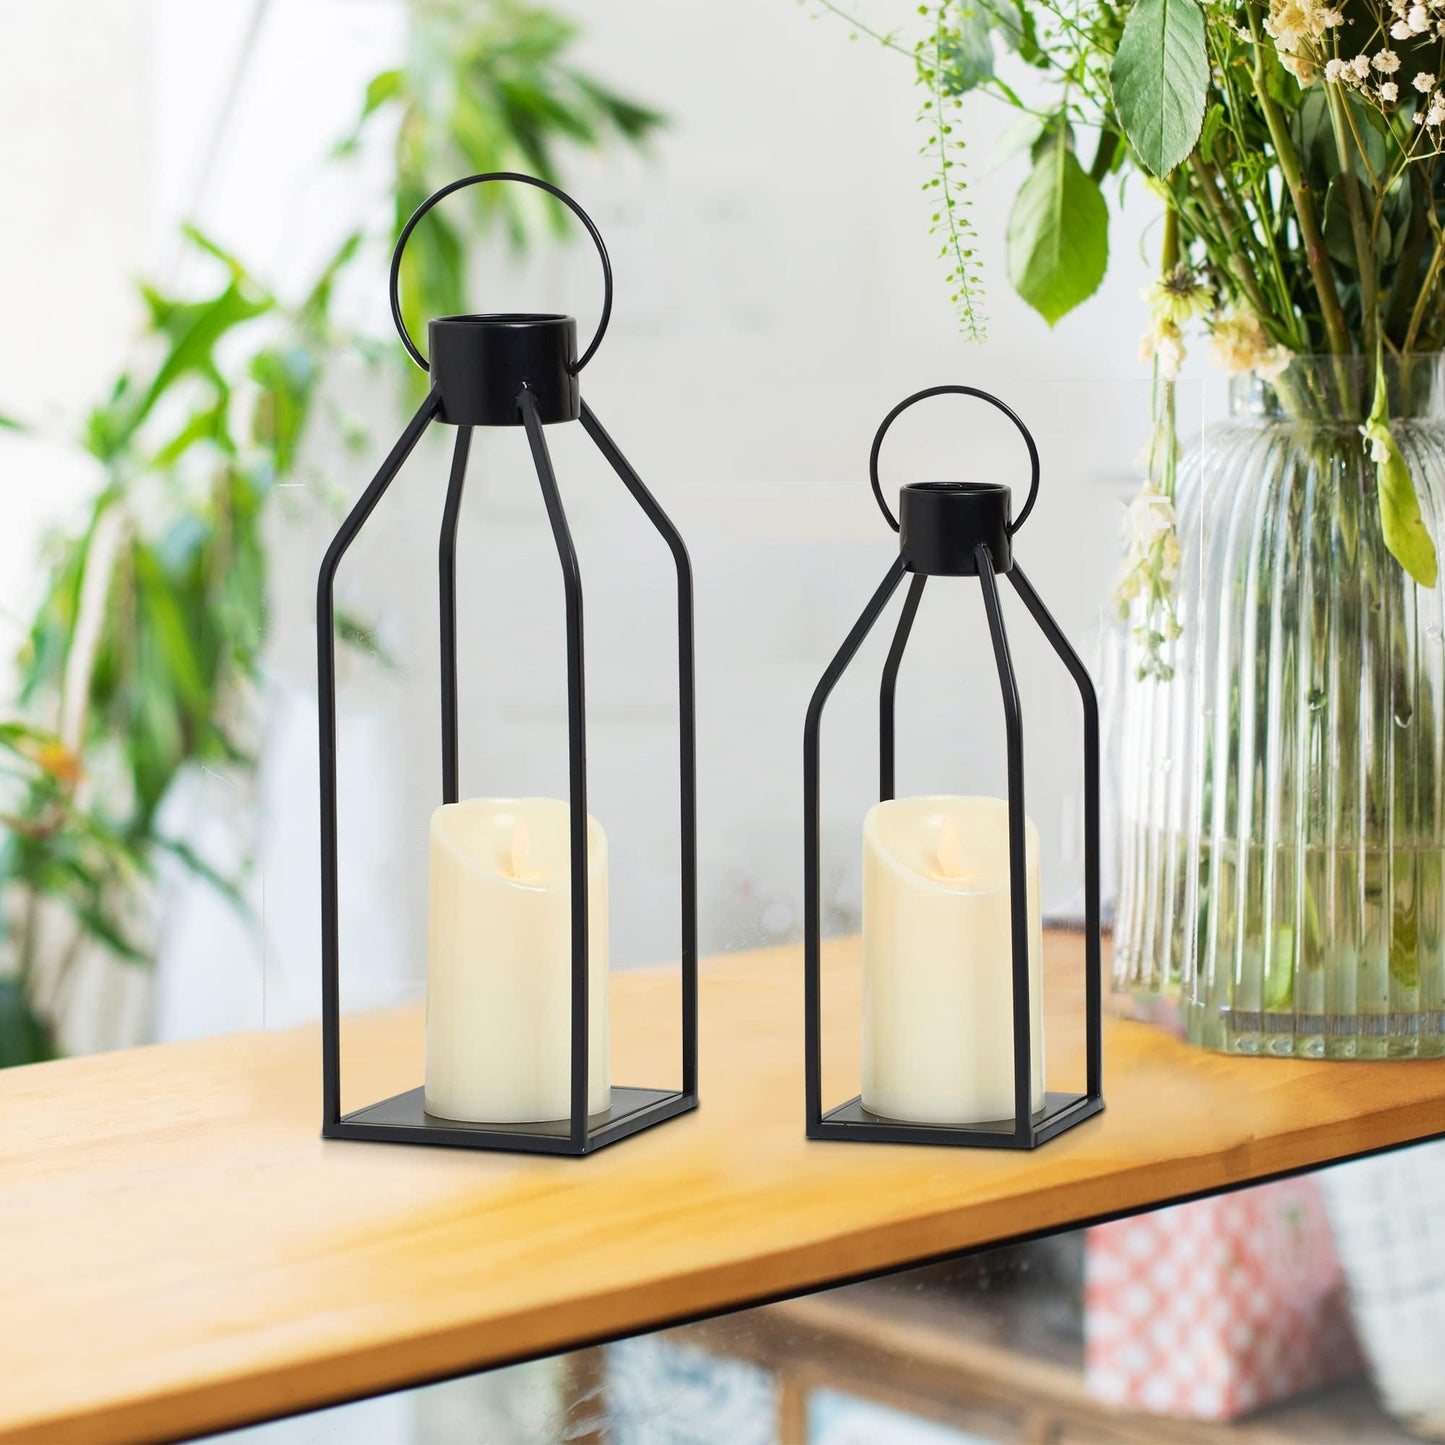 HPC Decor Modern Farmhouse Lantern Decor- Black Metal Candle Lanterns for Christmas- Lanterns Decorative w/Timer Flickering Candles for Living Room,Home,Indoor, Outdoor,Table,Fireplace Mantle Decor - CookCave